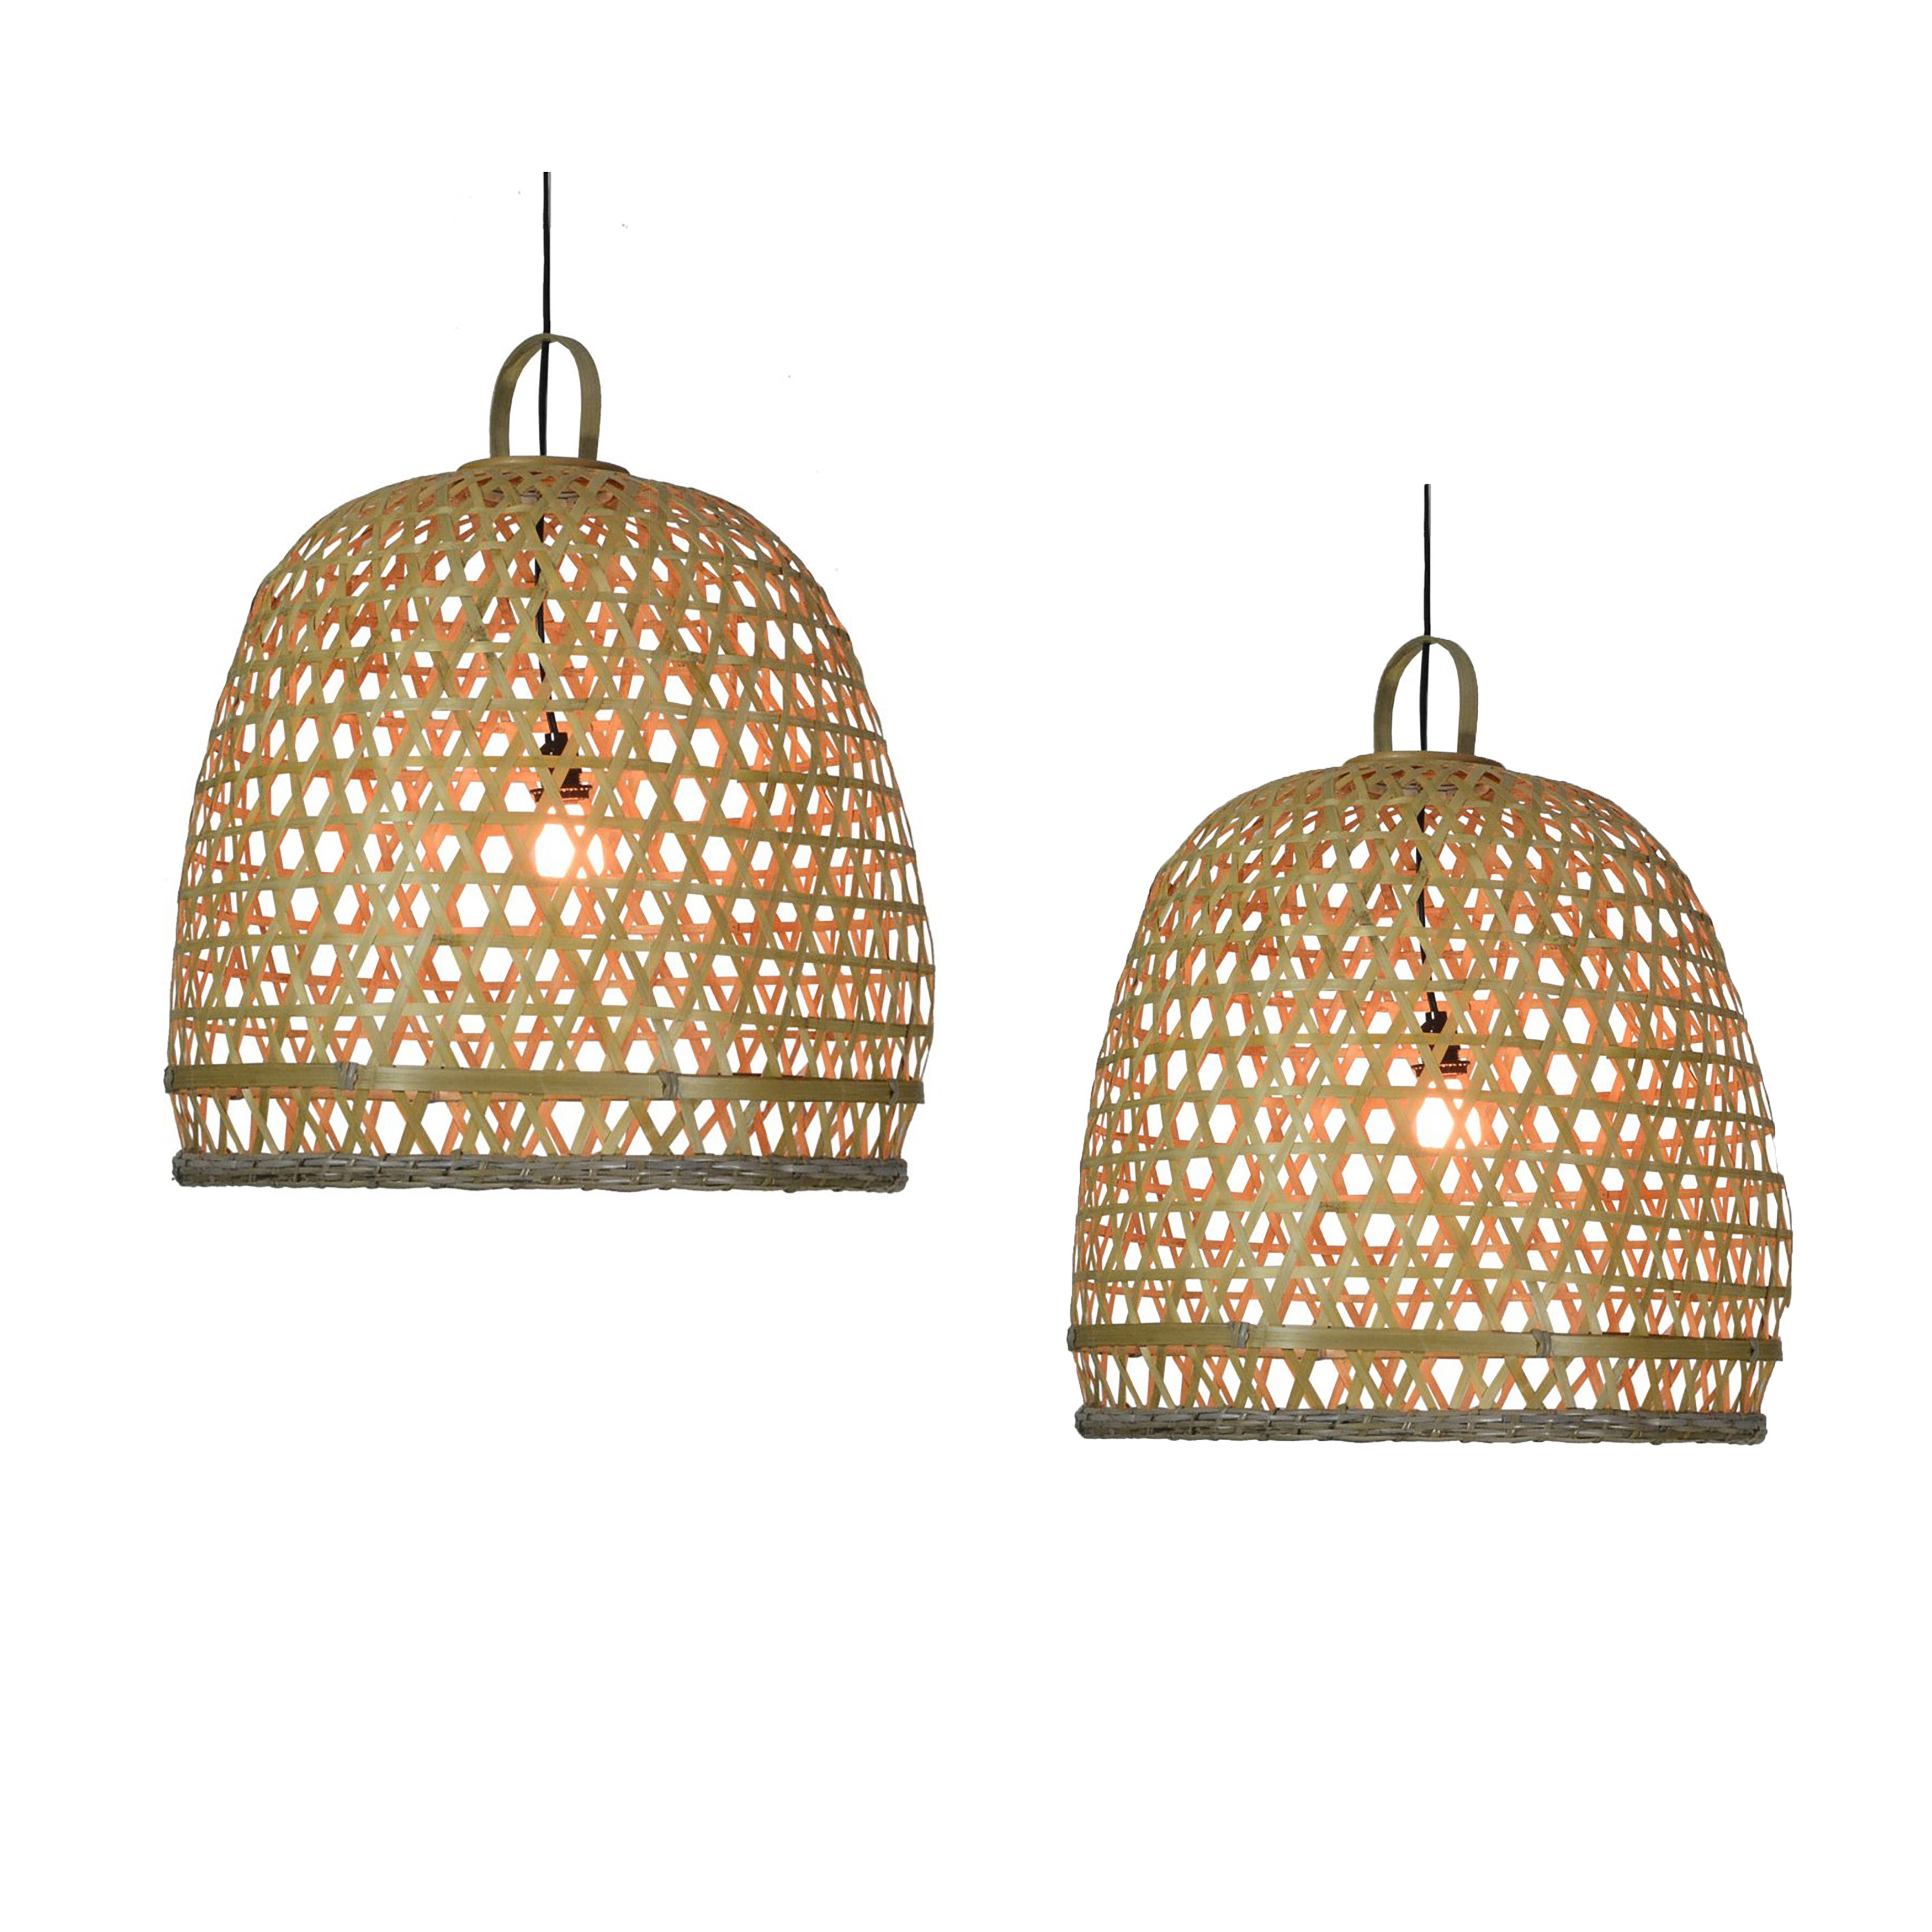 Crafted with a natural bamboo weave for an airy, warm accent piece that brings exciting texture to a space. Bamboo strands are known for being resistant, making them an excellent prospect for outdoor usage. This set of pendant lights is expertly handwoven by Indonesian Artisans. Amethyst Home provides interior design, new home construction design consulting, vintage area rugs, and lighting in the Boston metro area.